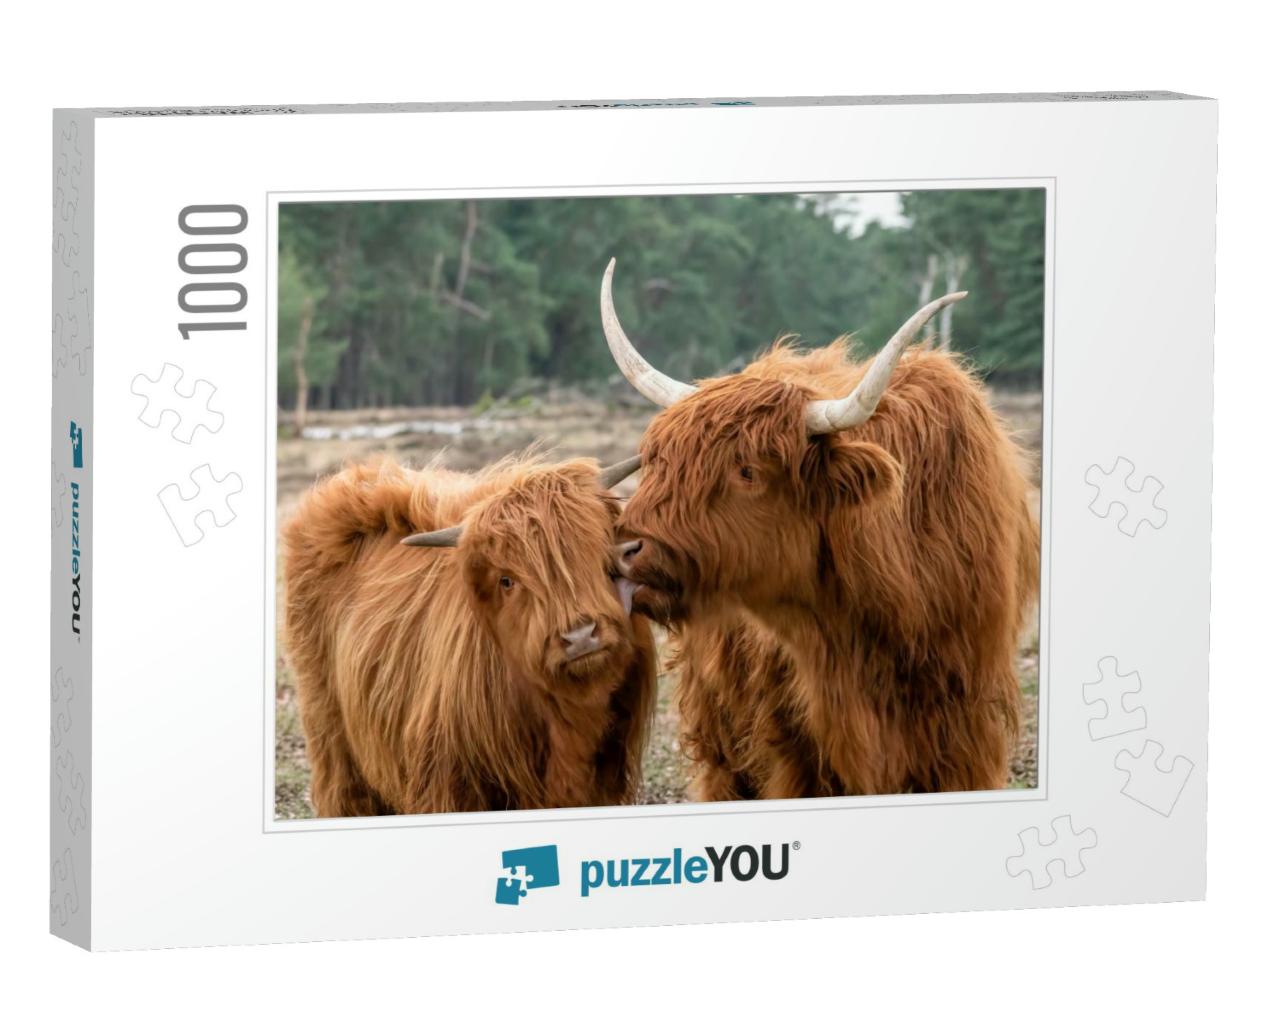 Beautiful Highland Cow Cattle with Calf Bos Taurus Taurus... Jigsaw Puzzle with 1000 pieces